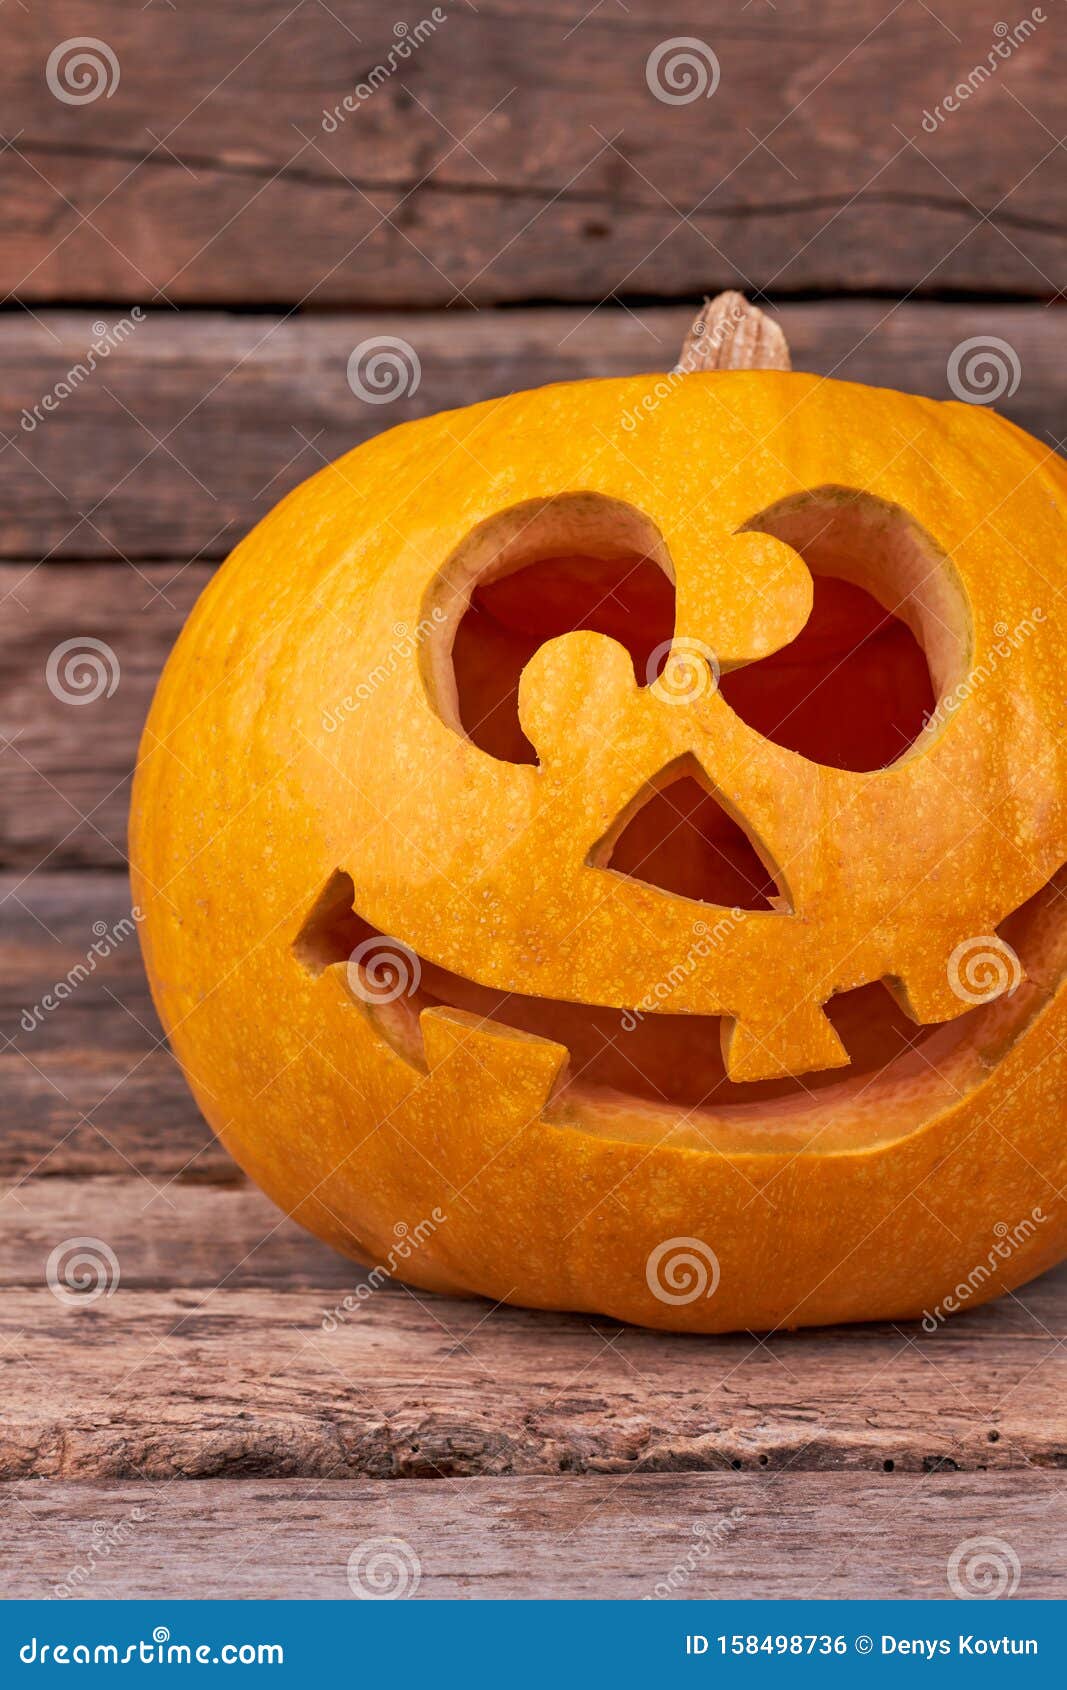 Halloween Pumpkin Lantern With Carved Smiling Face. Stock Photo - Image Of  Carved, Farm: 158498736